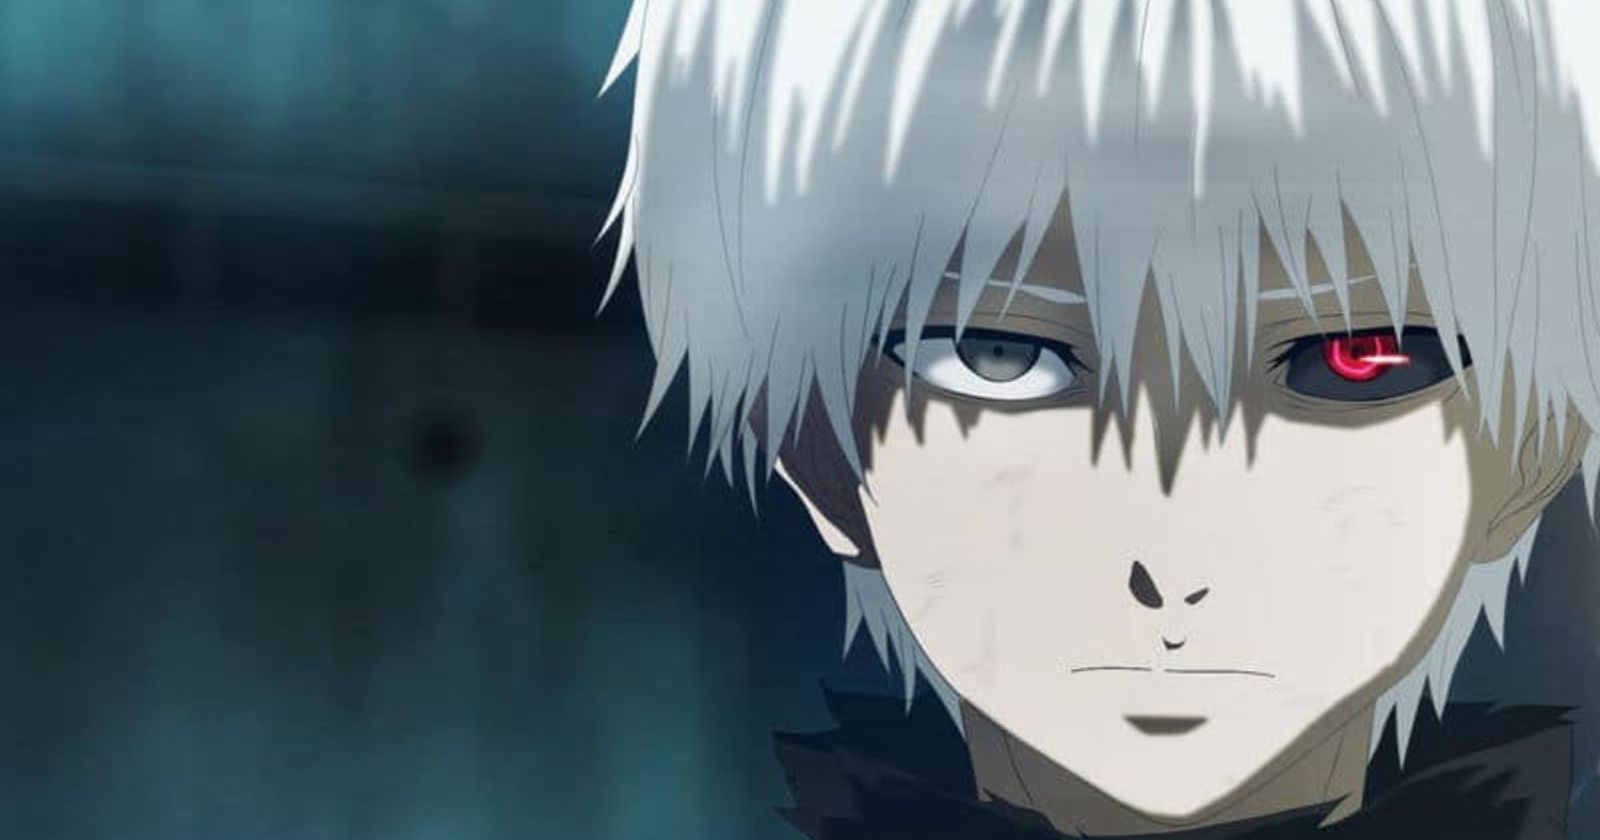 Can I watch Tokyo Ghoul on Netflix? Or do I have to get Crunchyroll? - Quora